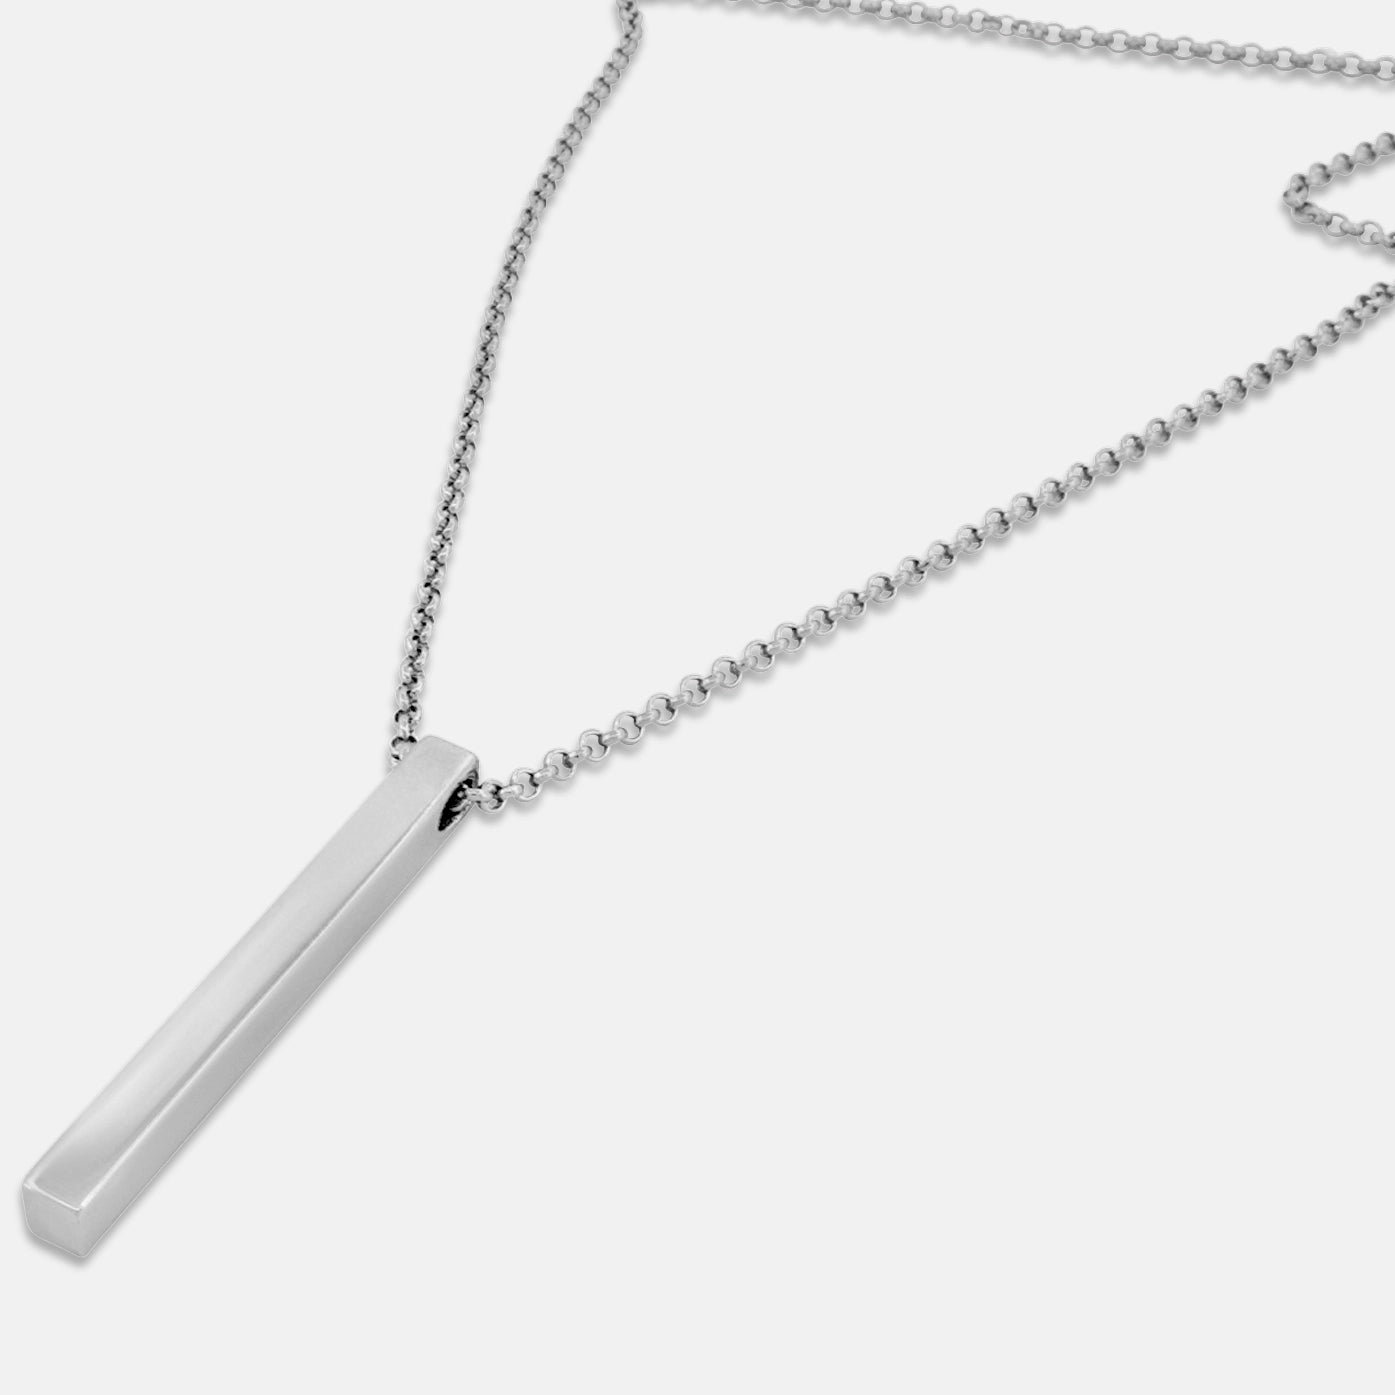 Top Angle of 925 Silver Slim Rectangular Bar Pendant Necklace and Sterling Silver Rolo Chain